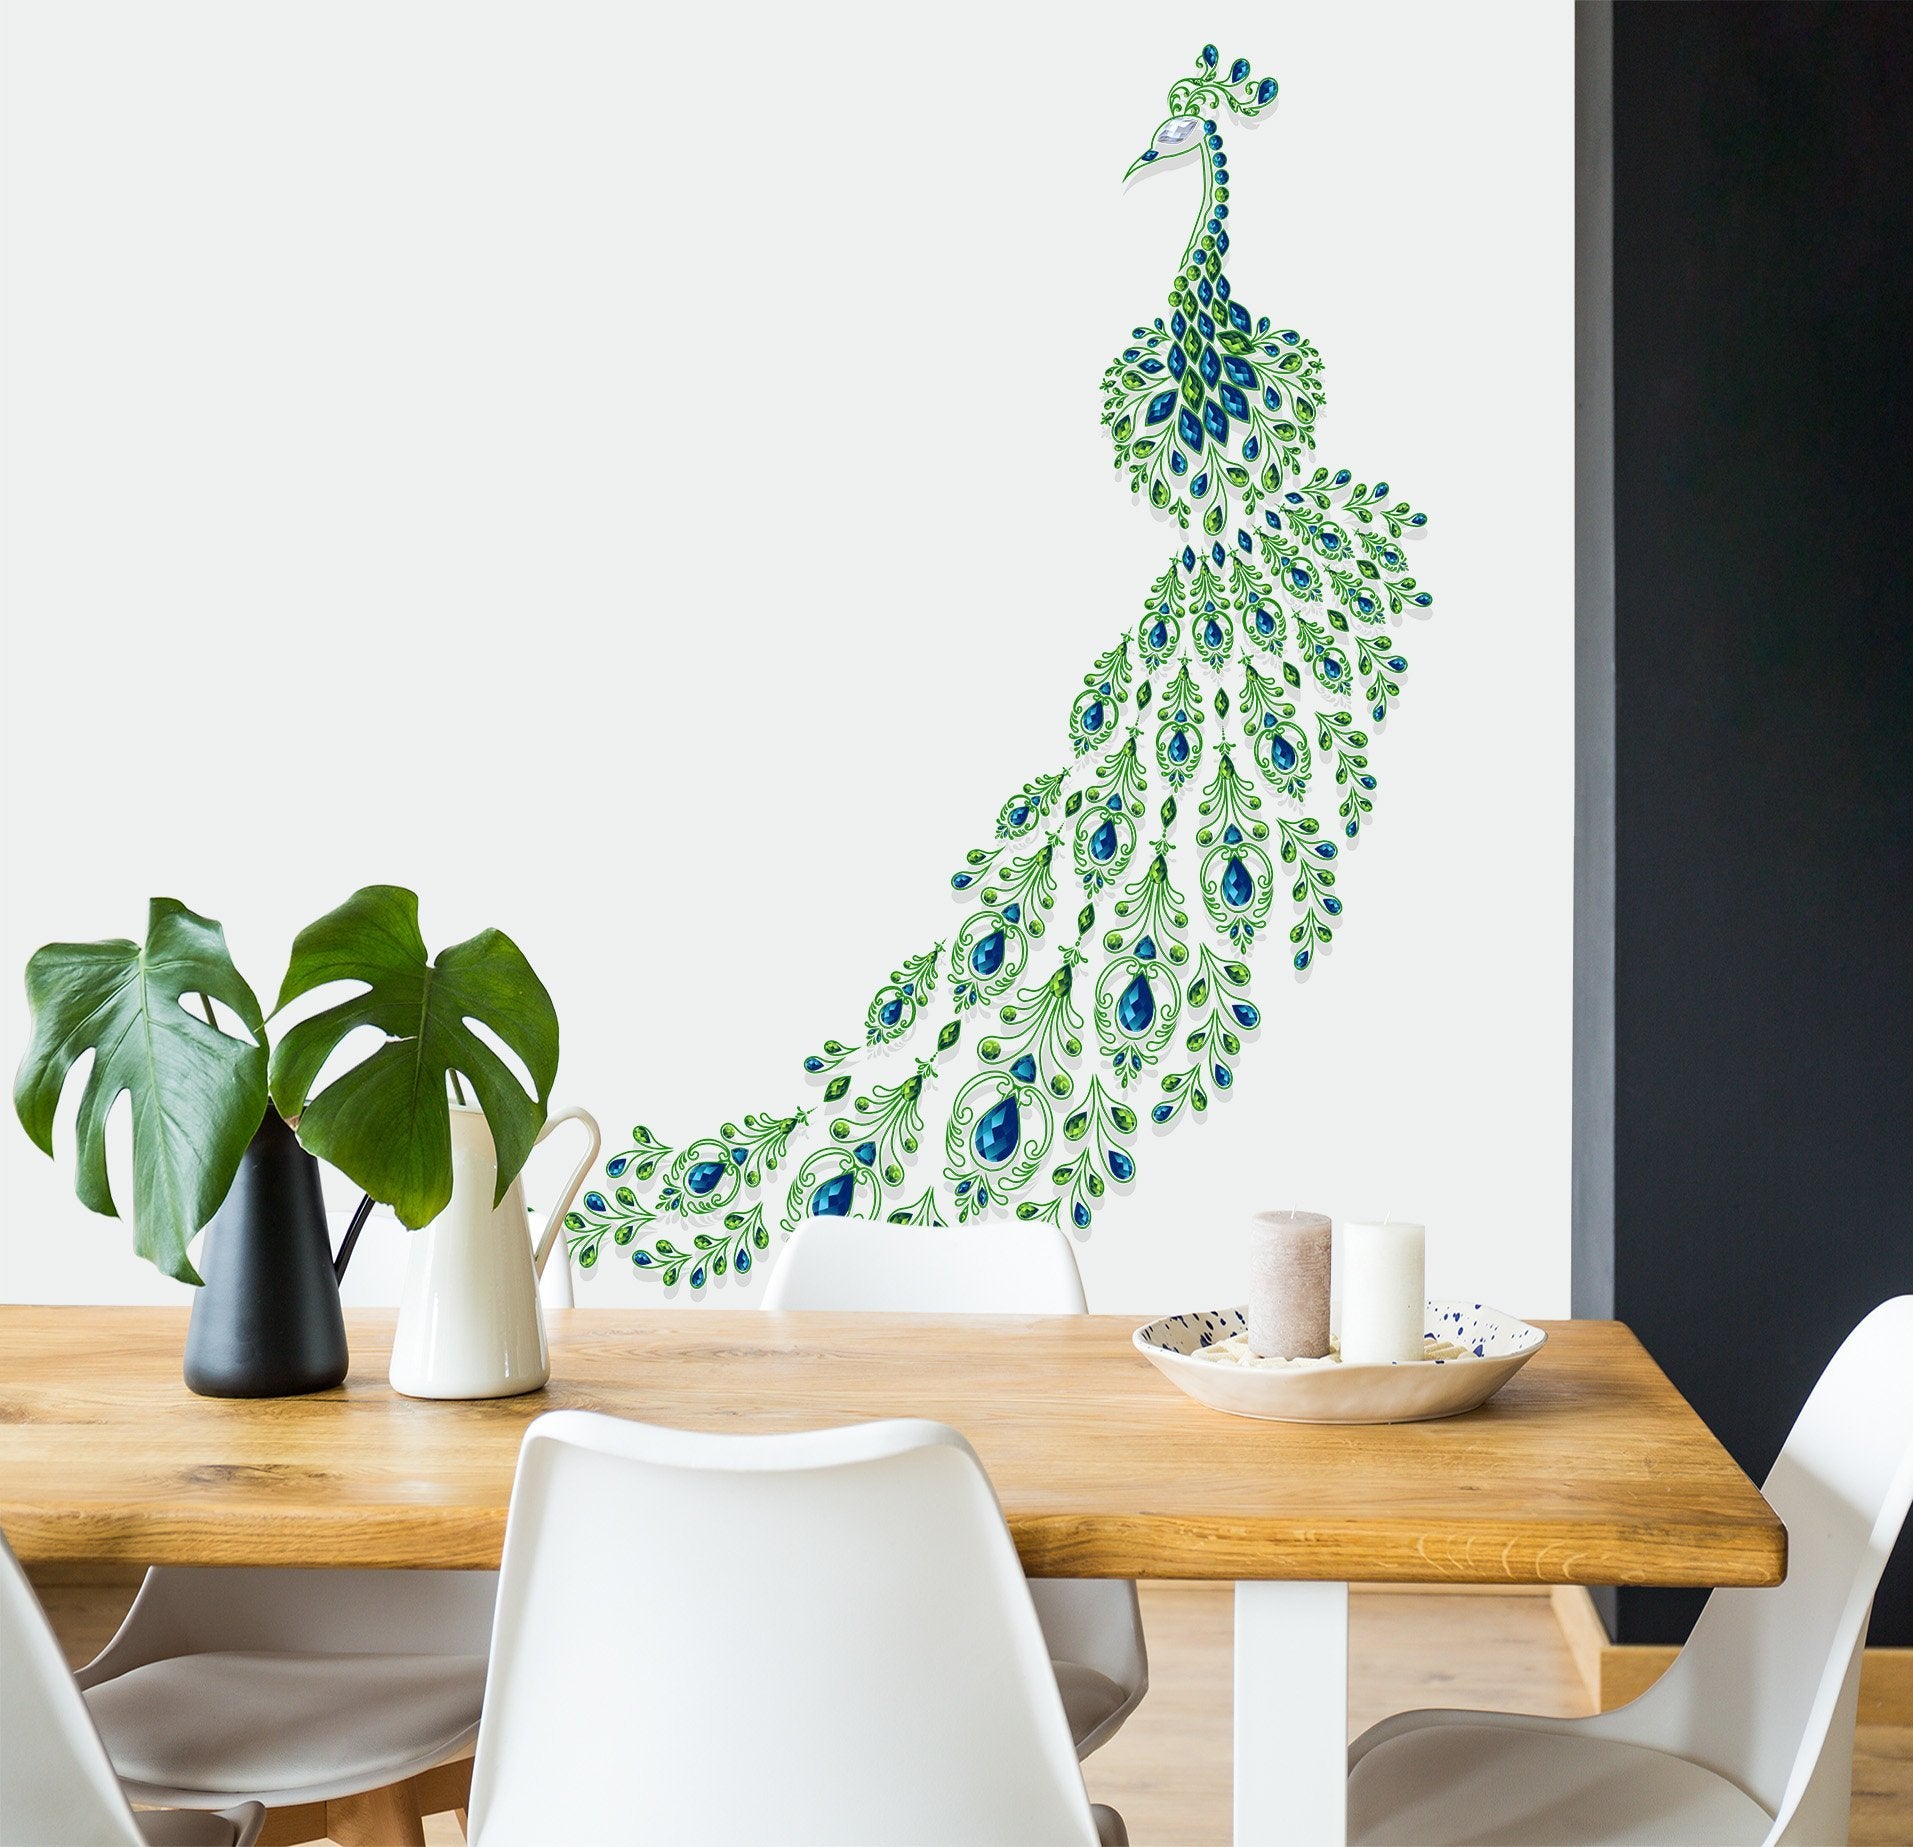 3D Peacock Tail Feather 042 Wall Stickers Wallpaper AJ Wallpaper 